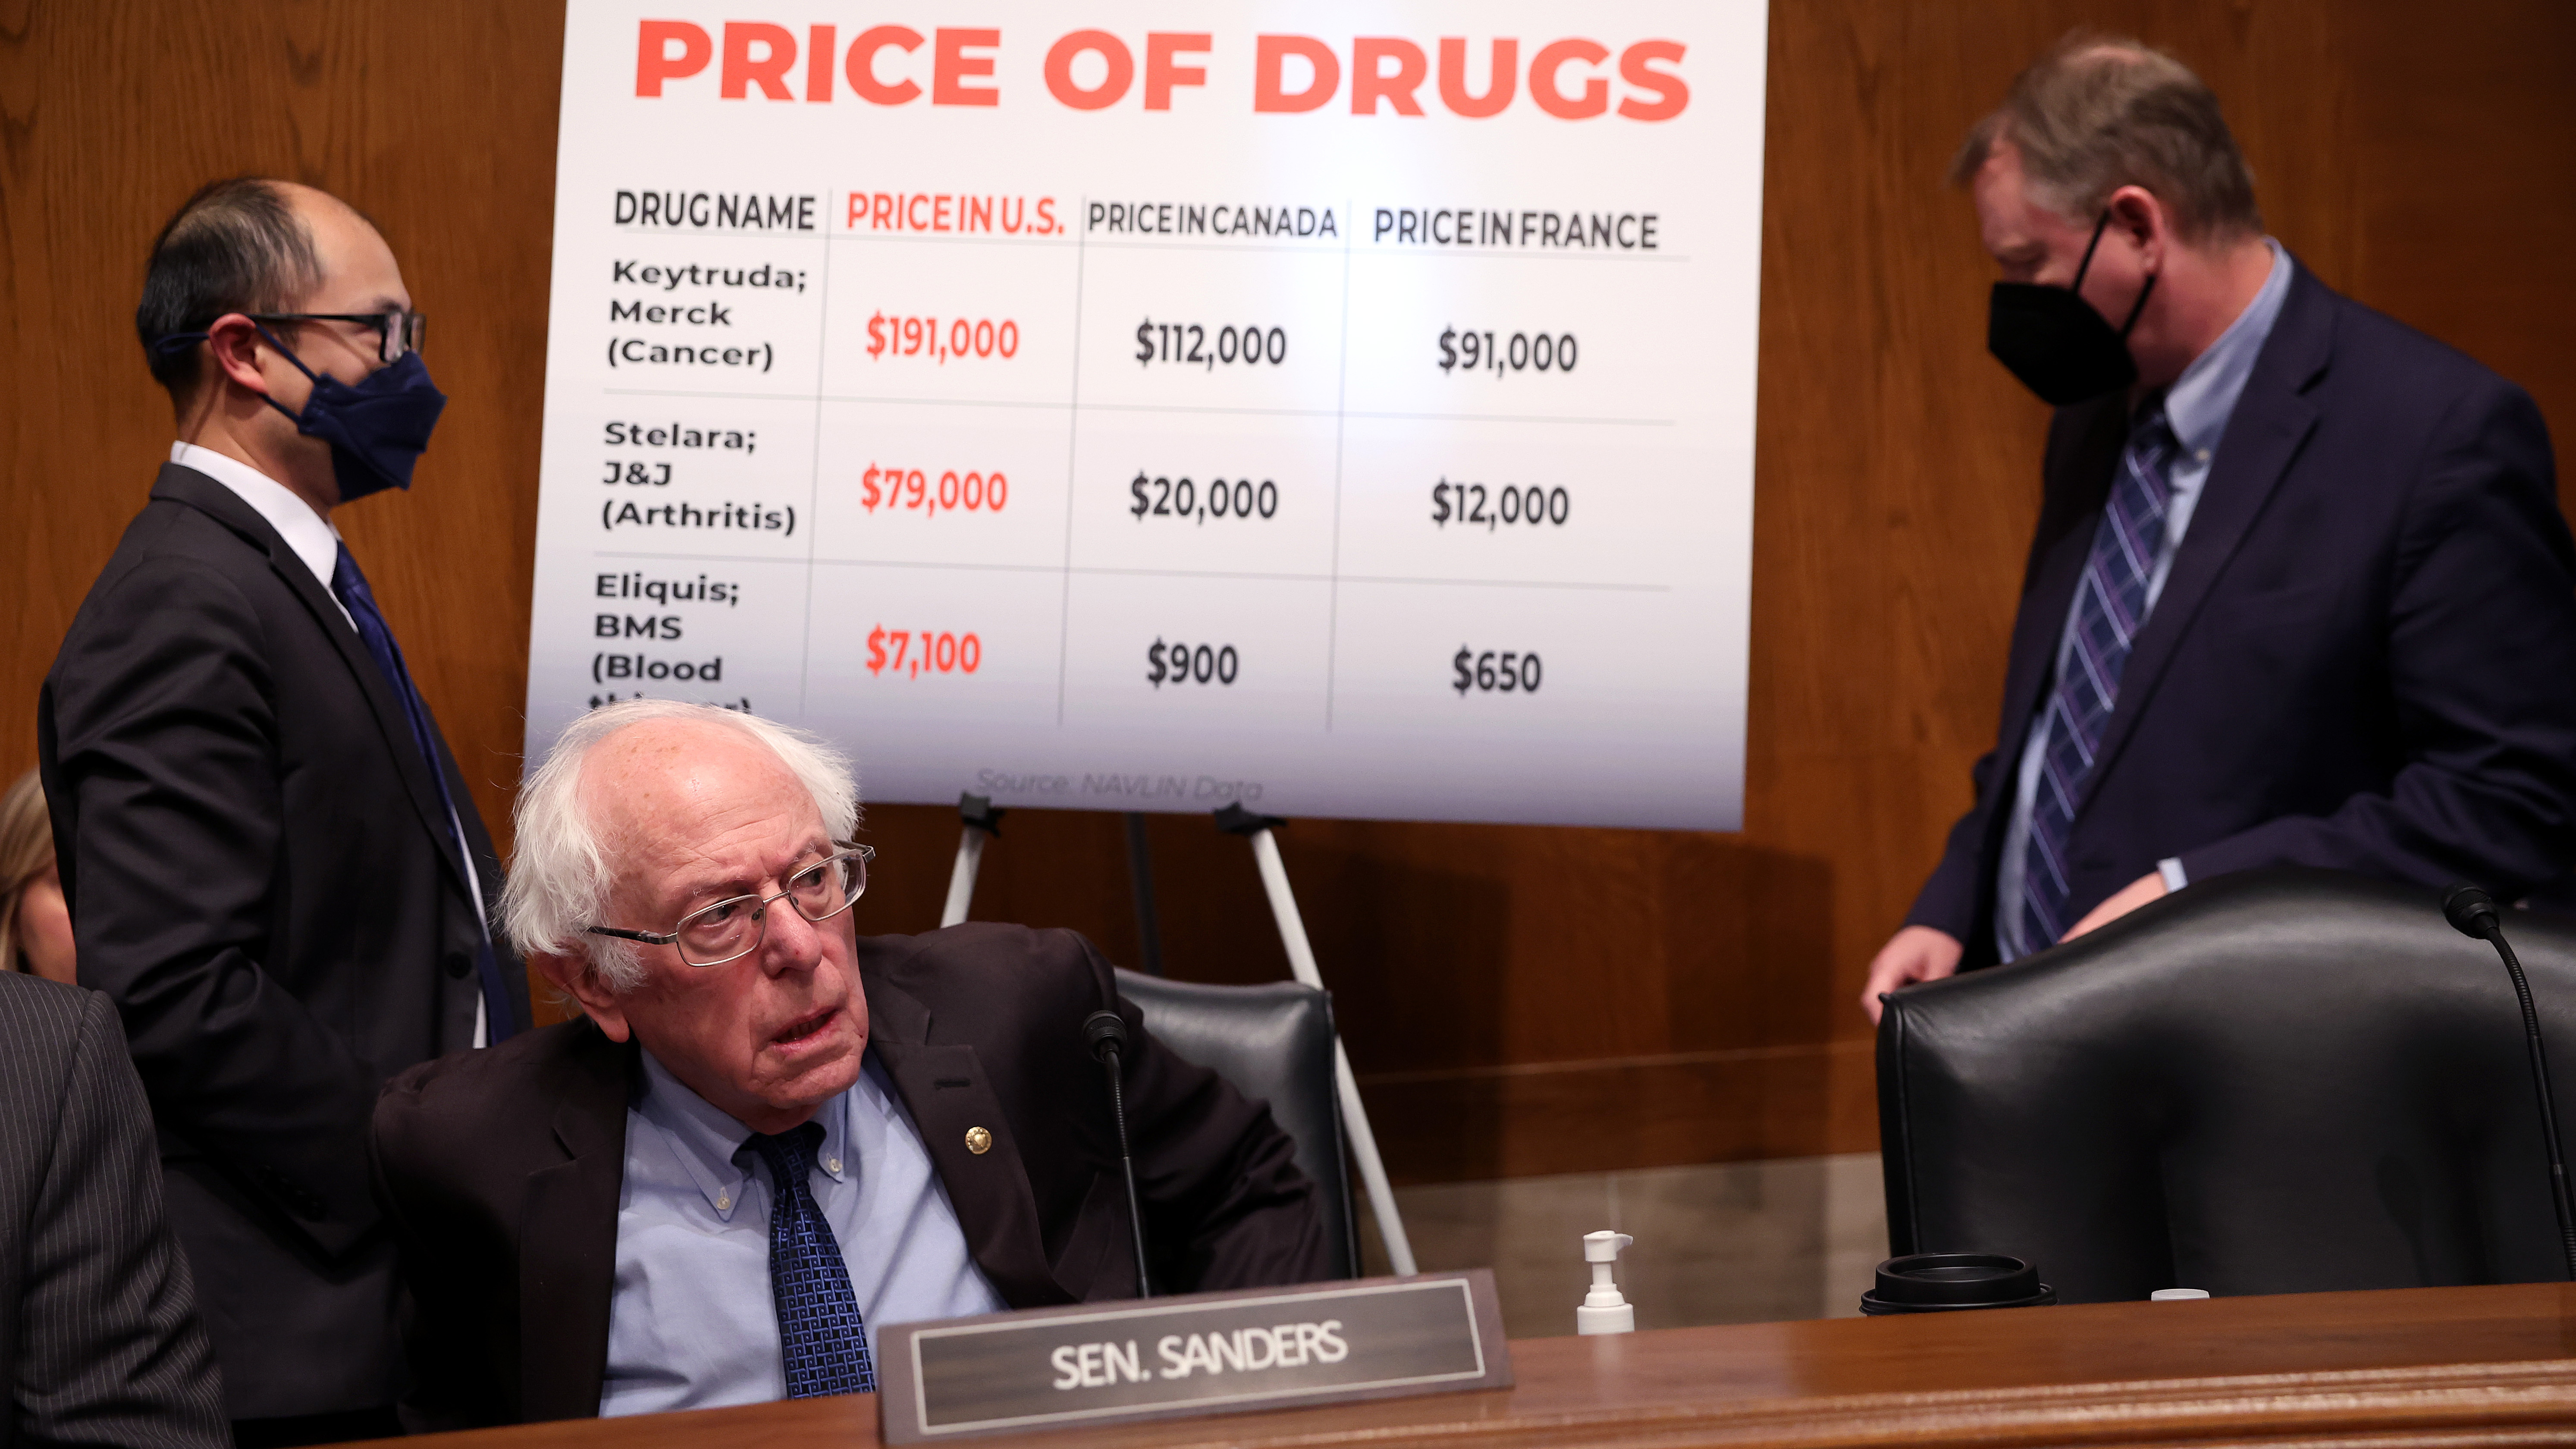 Vermont Sen. Bernie Sanders, chairman of the Senate Health, Education, Labor, and Pensions Committee, pressed executives from Bristol Myers Squibb, Merck and Johnson & Johnson about the prices they charge for drugs in the U.S.